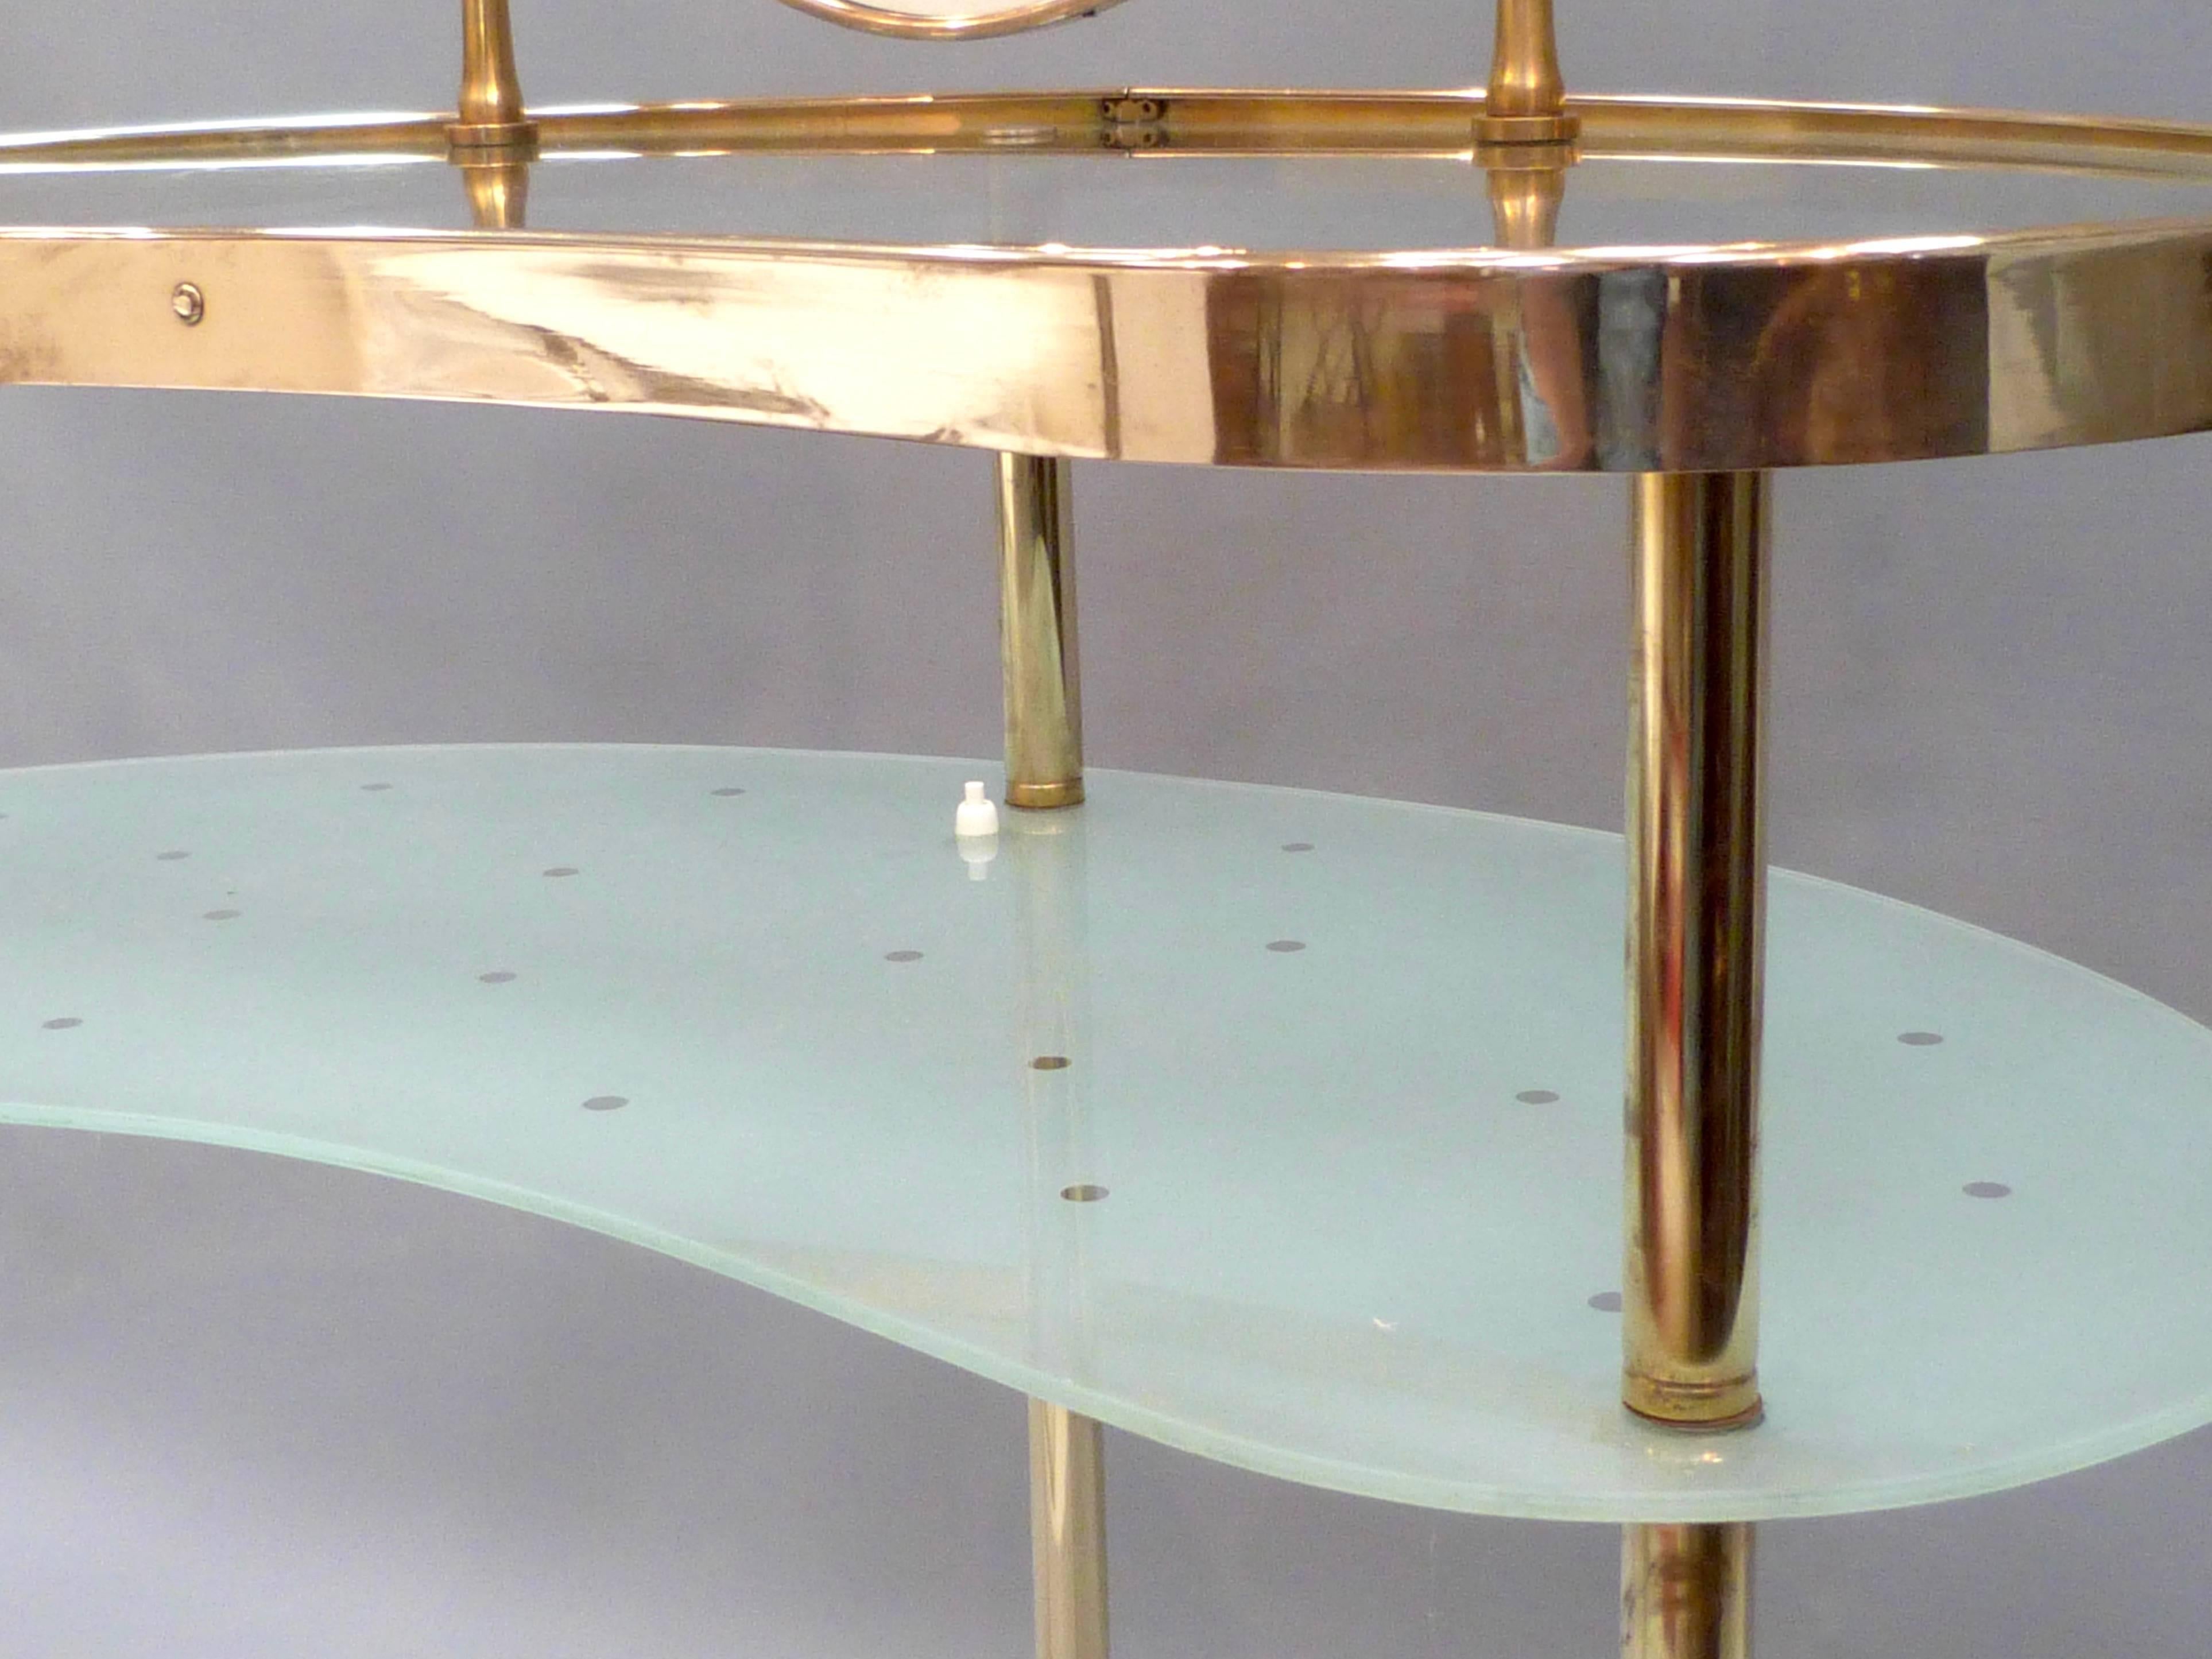 An unusual mid-20th century Italian brass and glass dressing table with integral brass framed mirror.